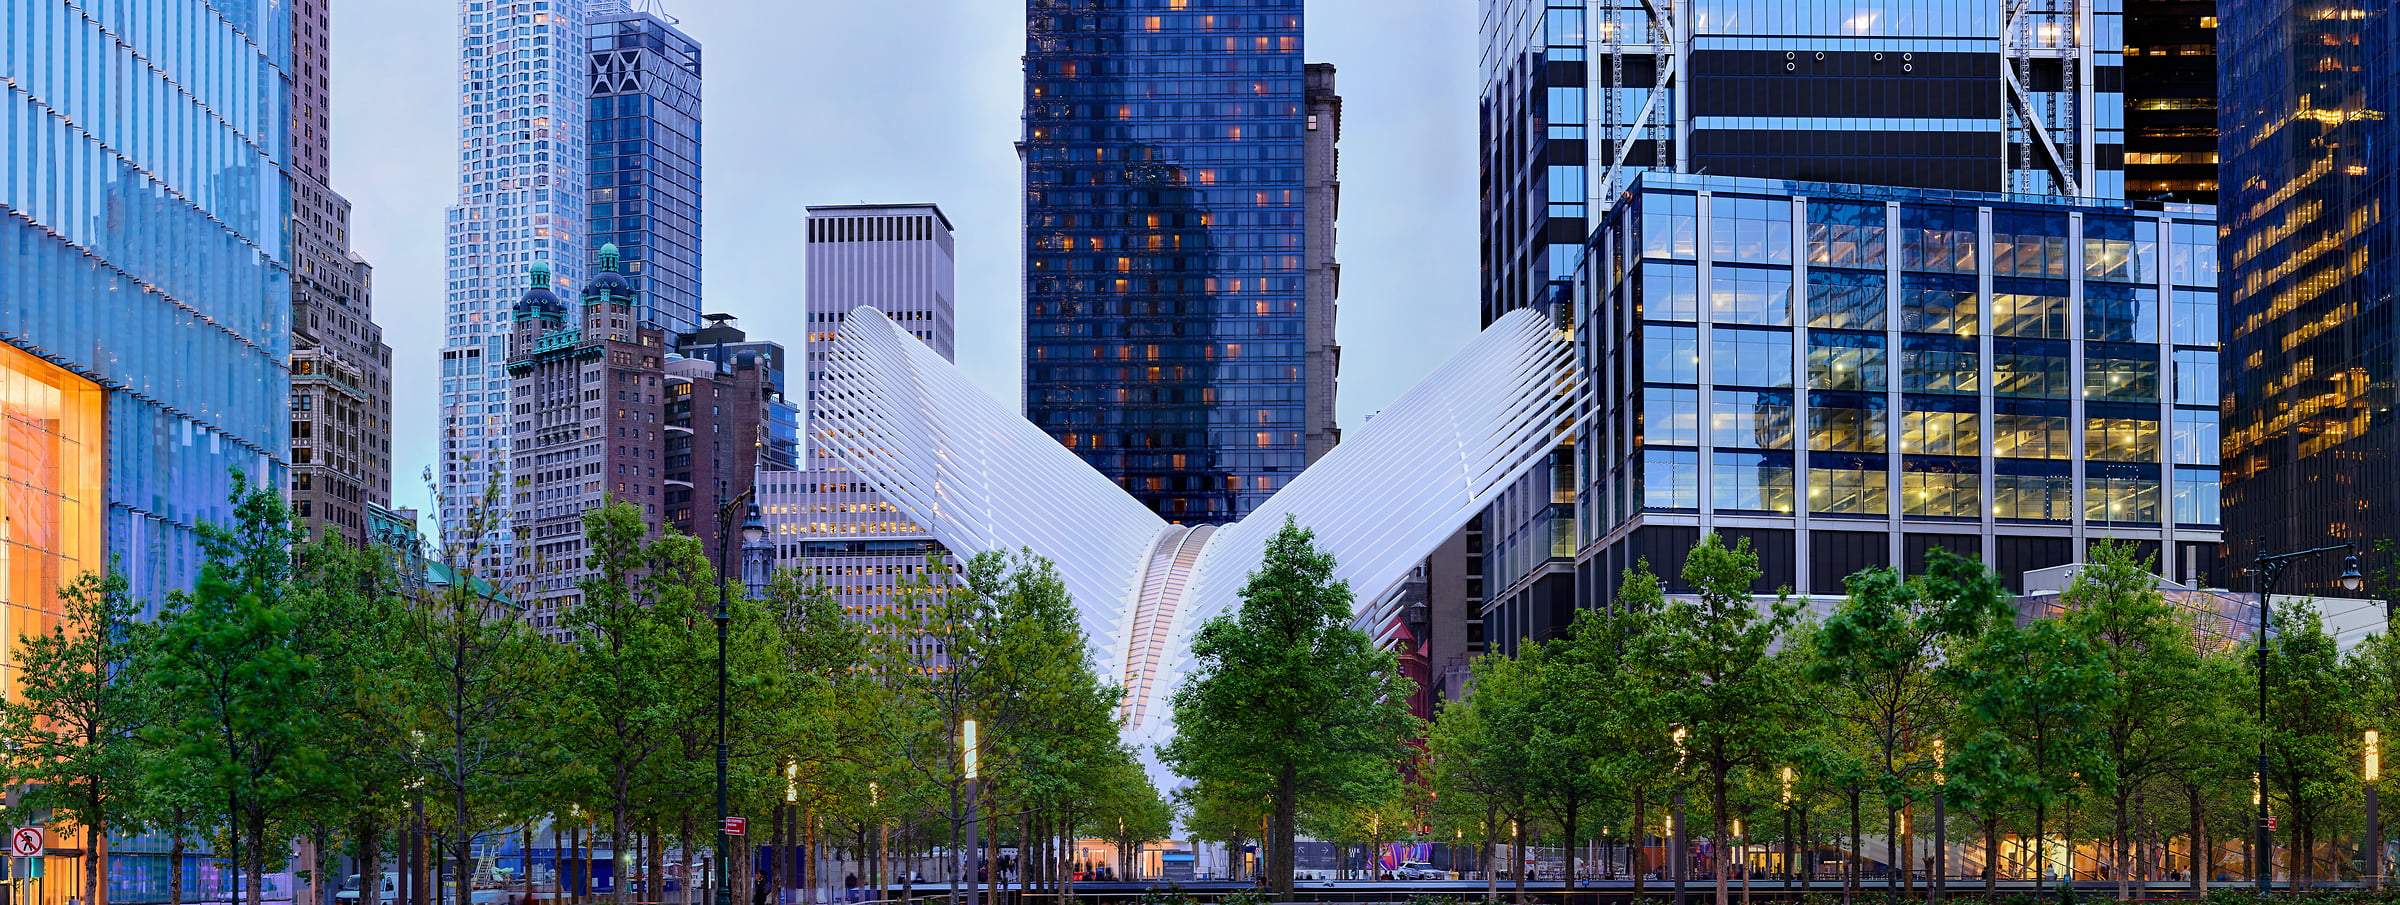 704 megapixels! A very high resolution, large-format VAST photo print of the Oculus building in downtown Manhattan; photograph created by Beyti Barbaros in New York City, New York.